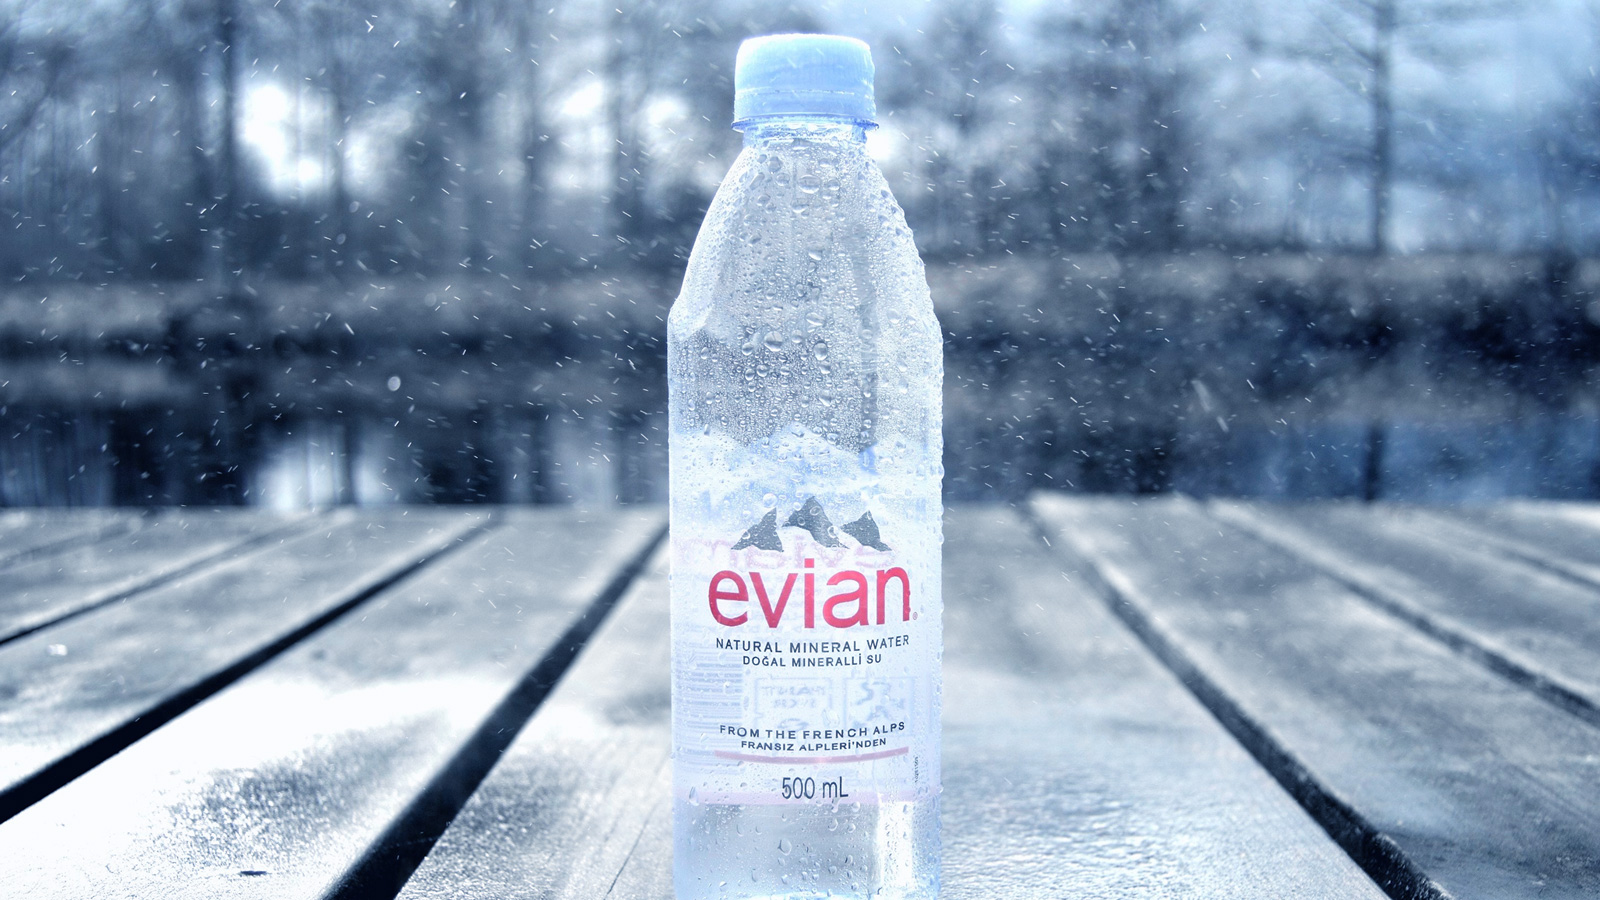 EVIAN WATER IS NOW AVAILABLE AT PEPSICO - Groupex Canada